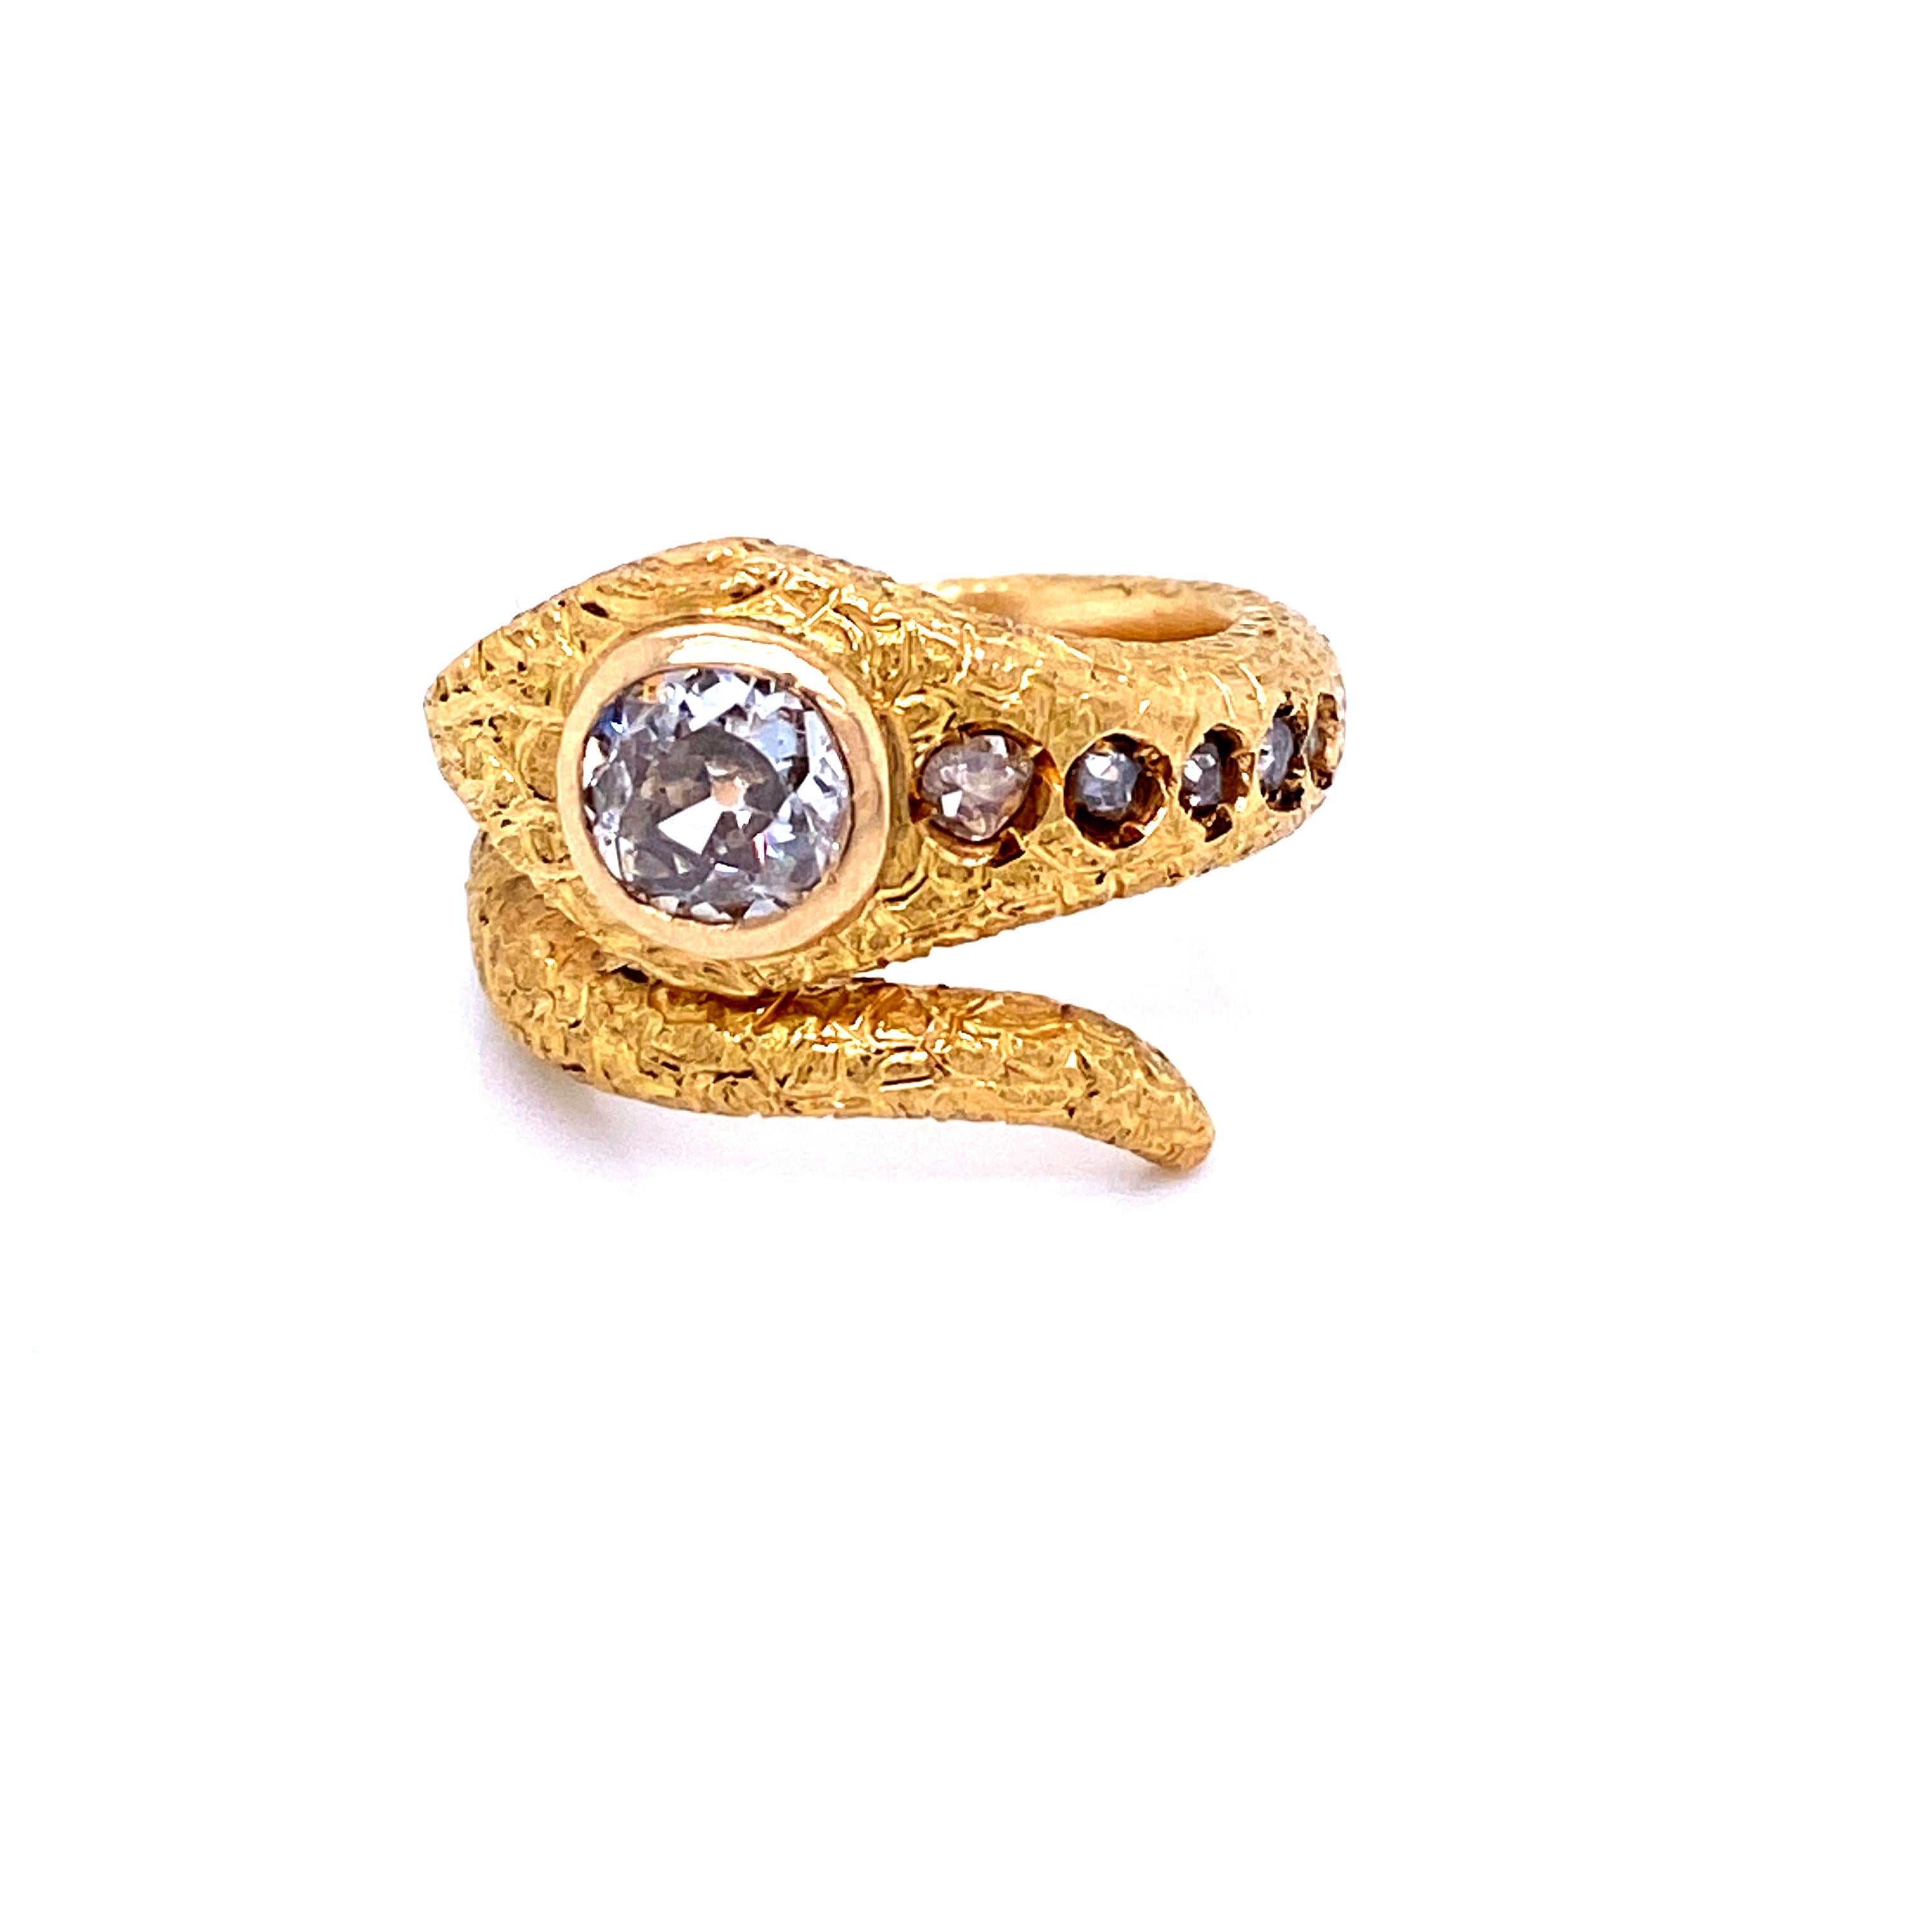 Old Mine Cut Antique Diamond Coiled Snake Engraved Ring